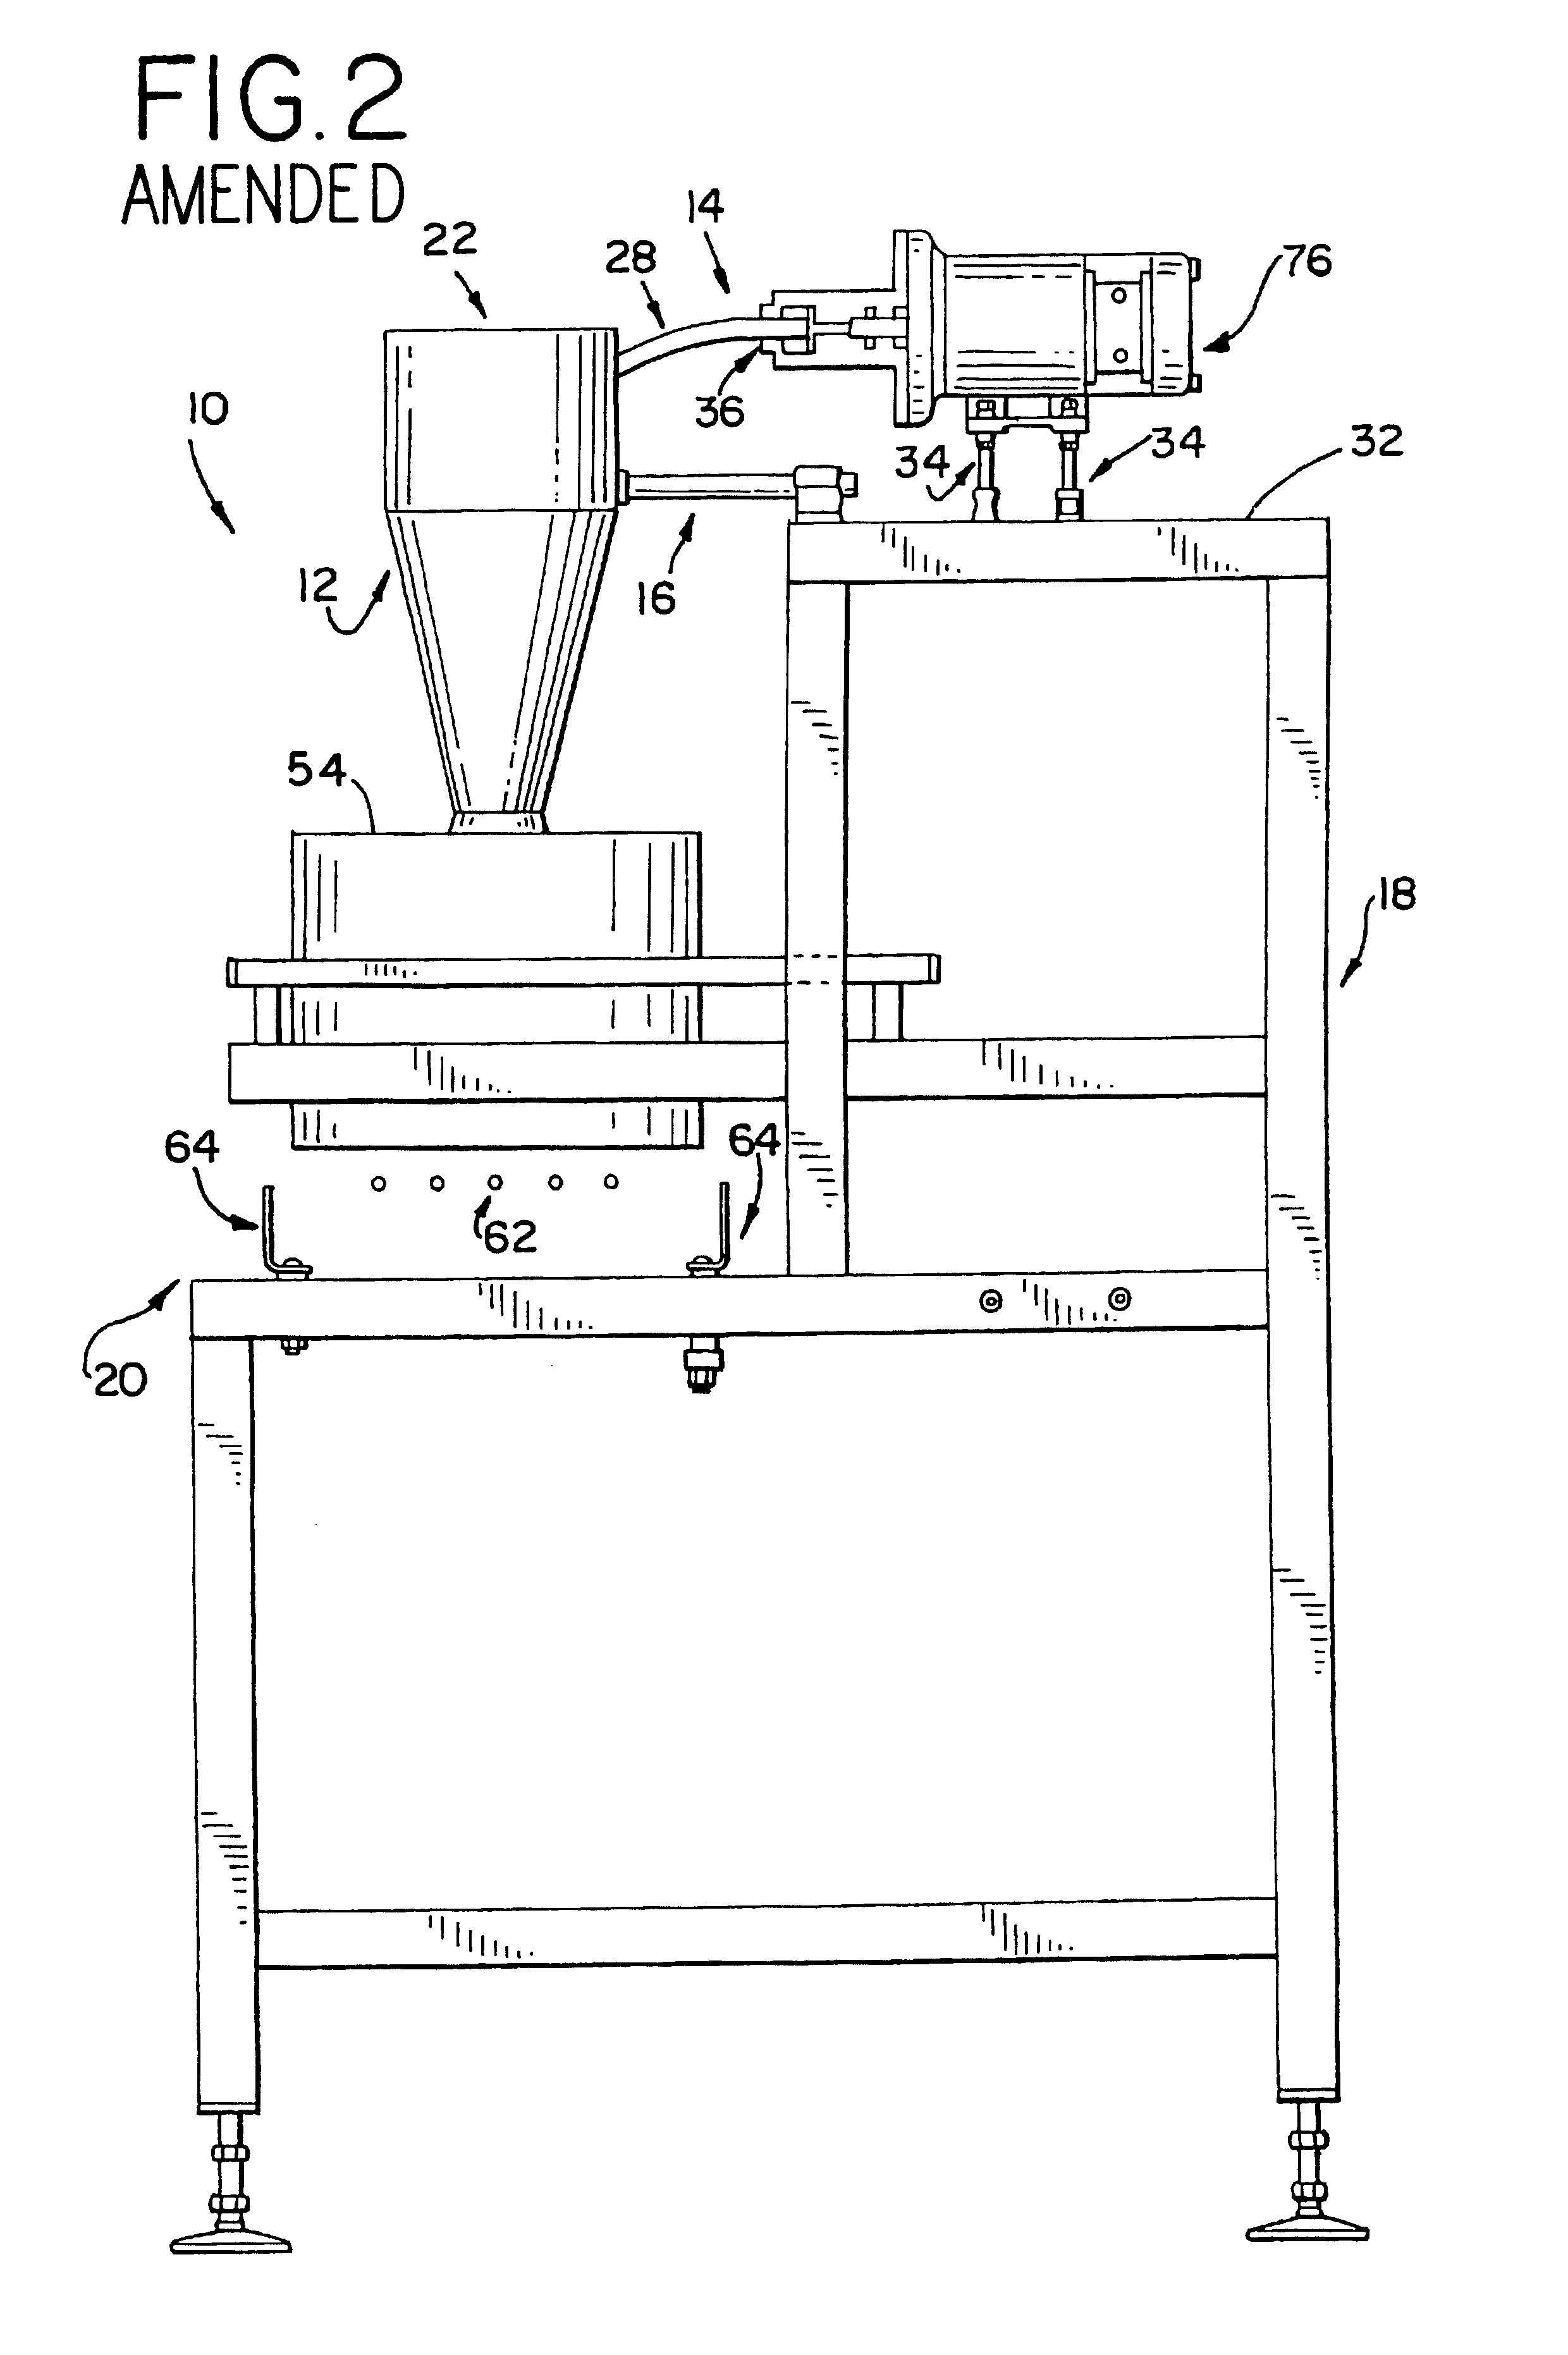 Apparatus for dispensing a quantity of material on a shell